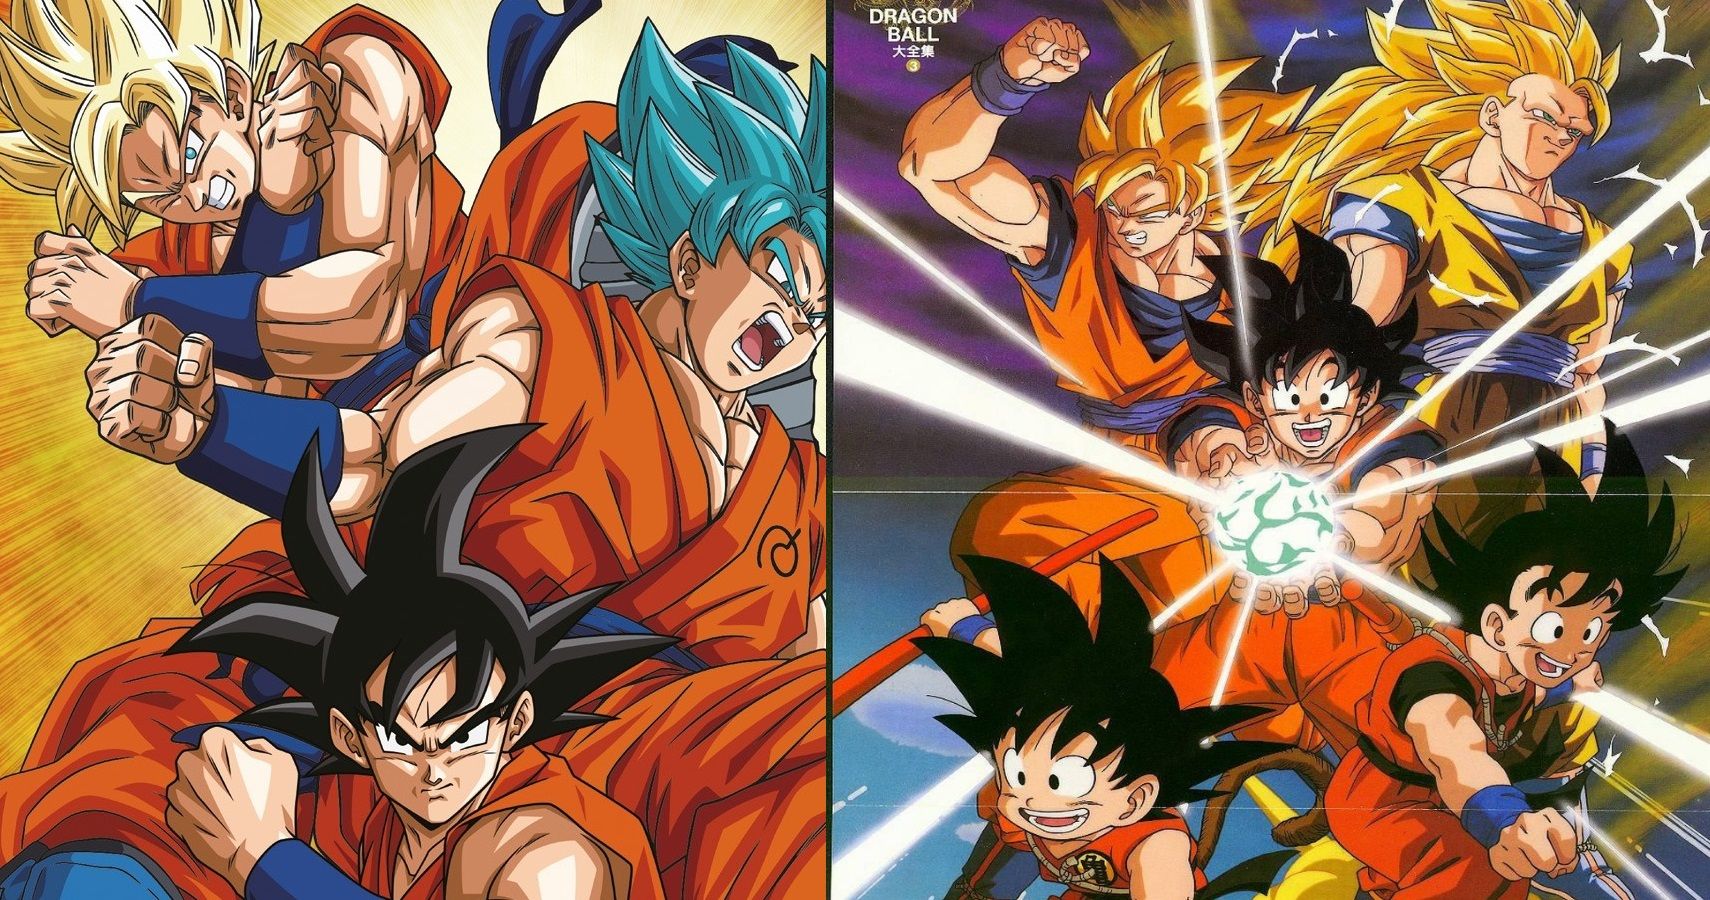 Dragon Ball Z: A Few Facts about the Classic Anime